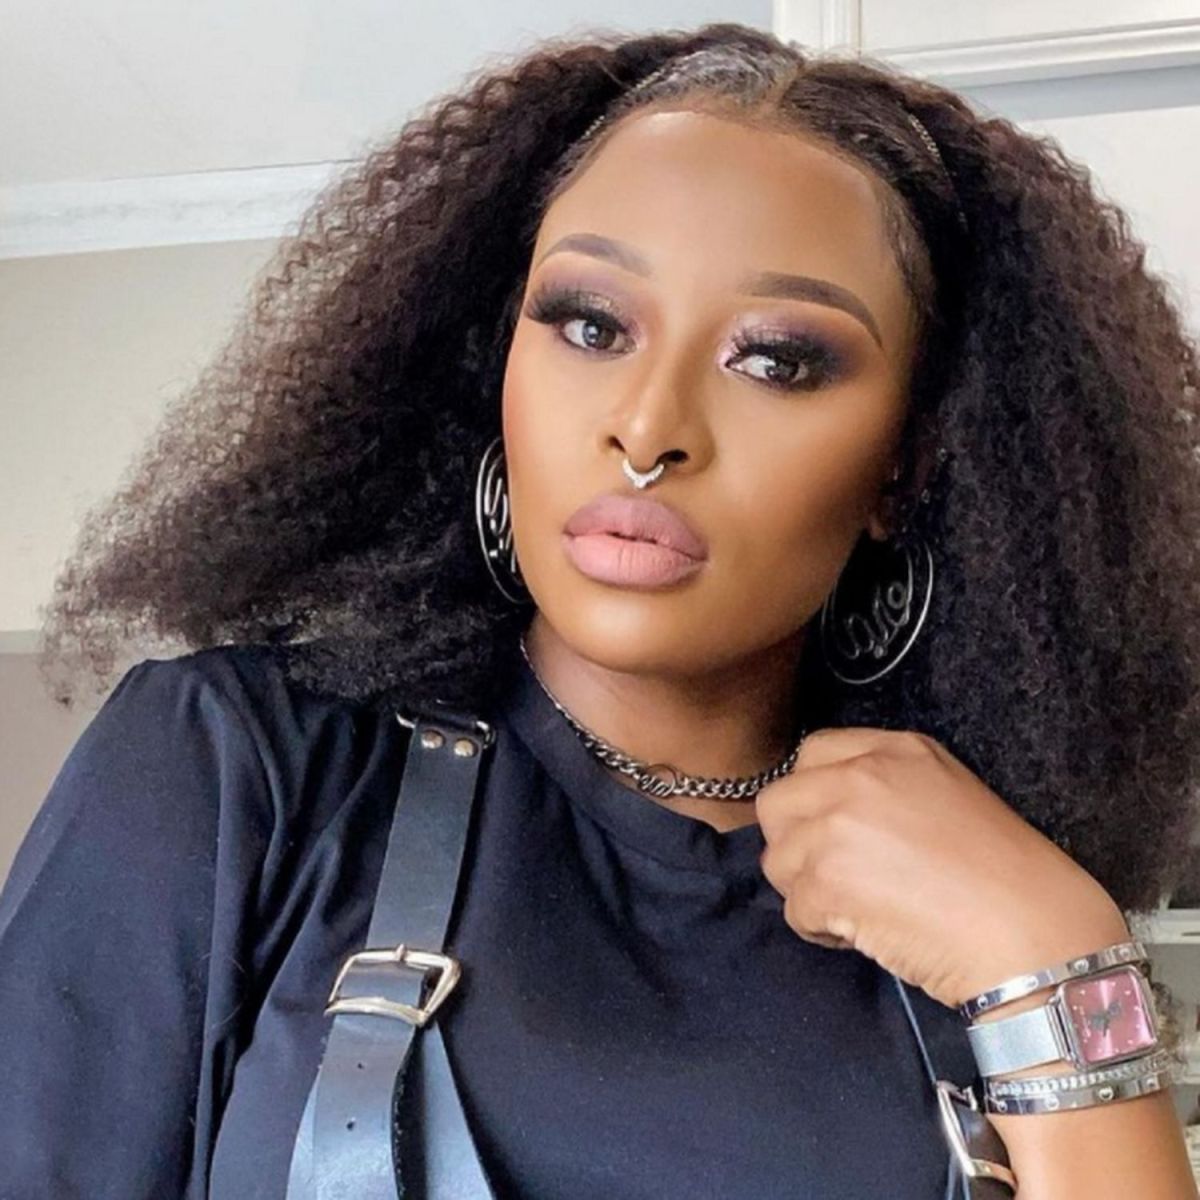 Dj Zinhle Reacts To Backlash Over Not Knowing How To Cook 10